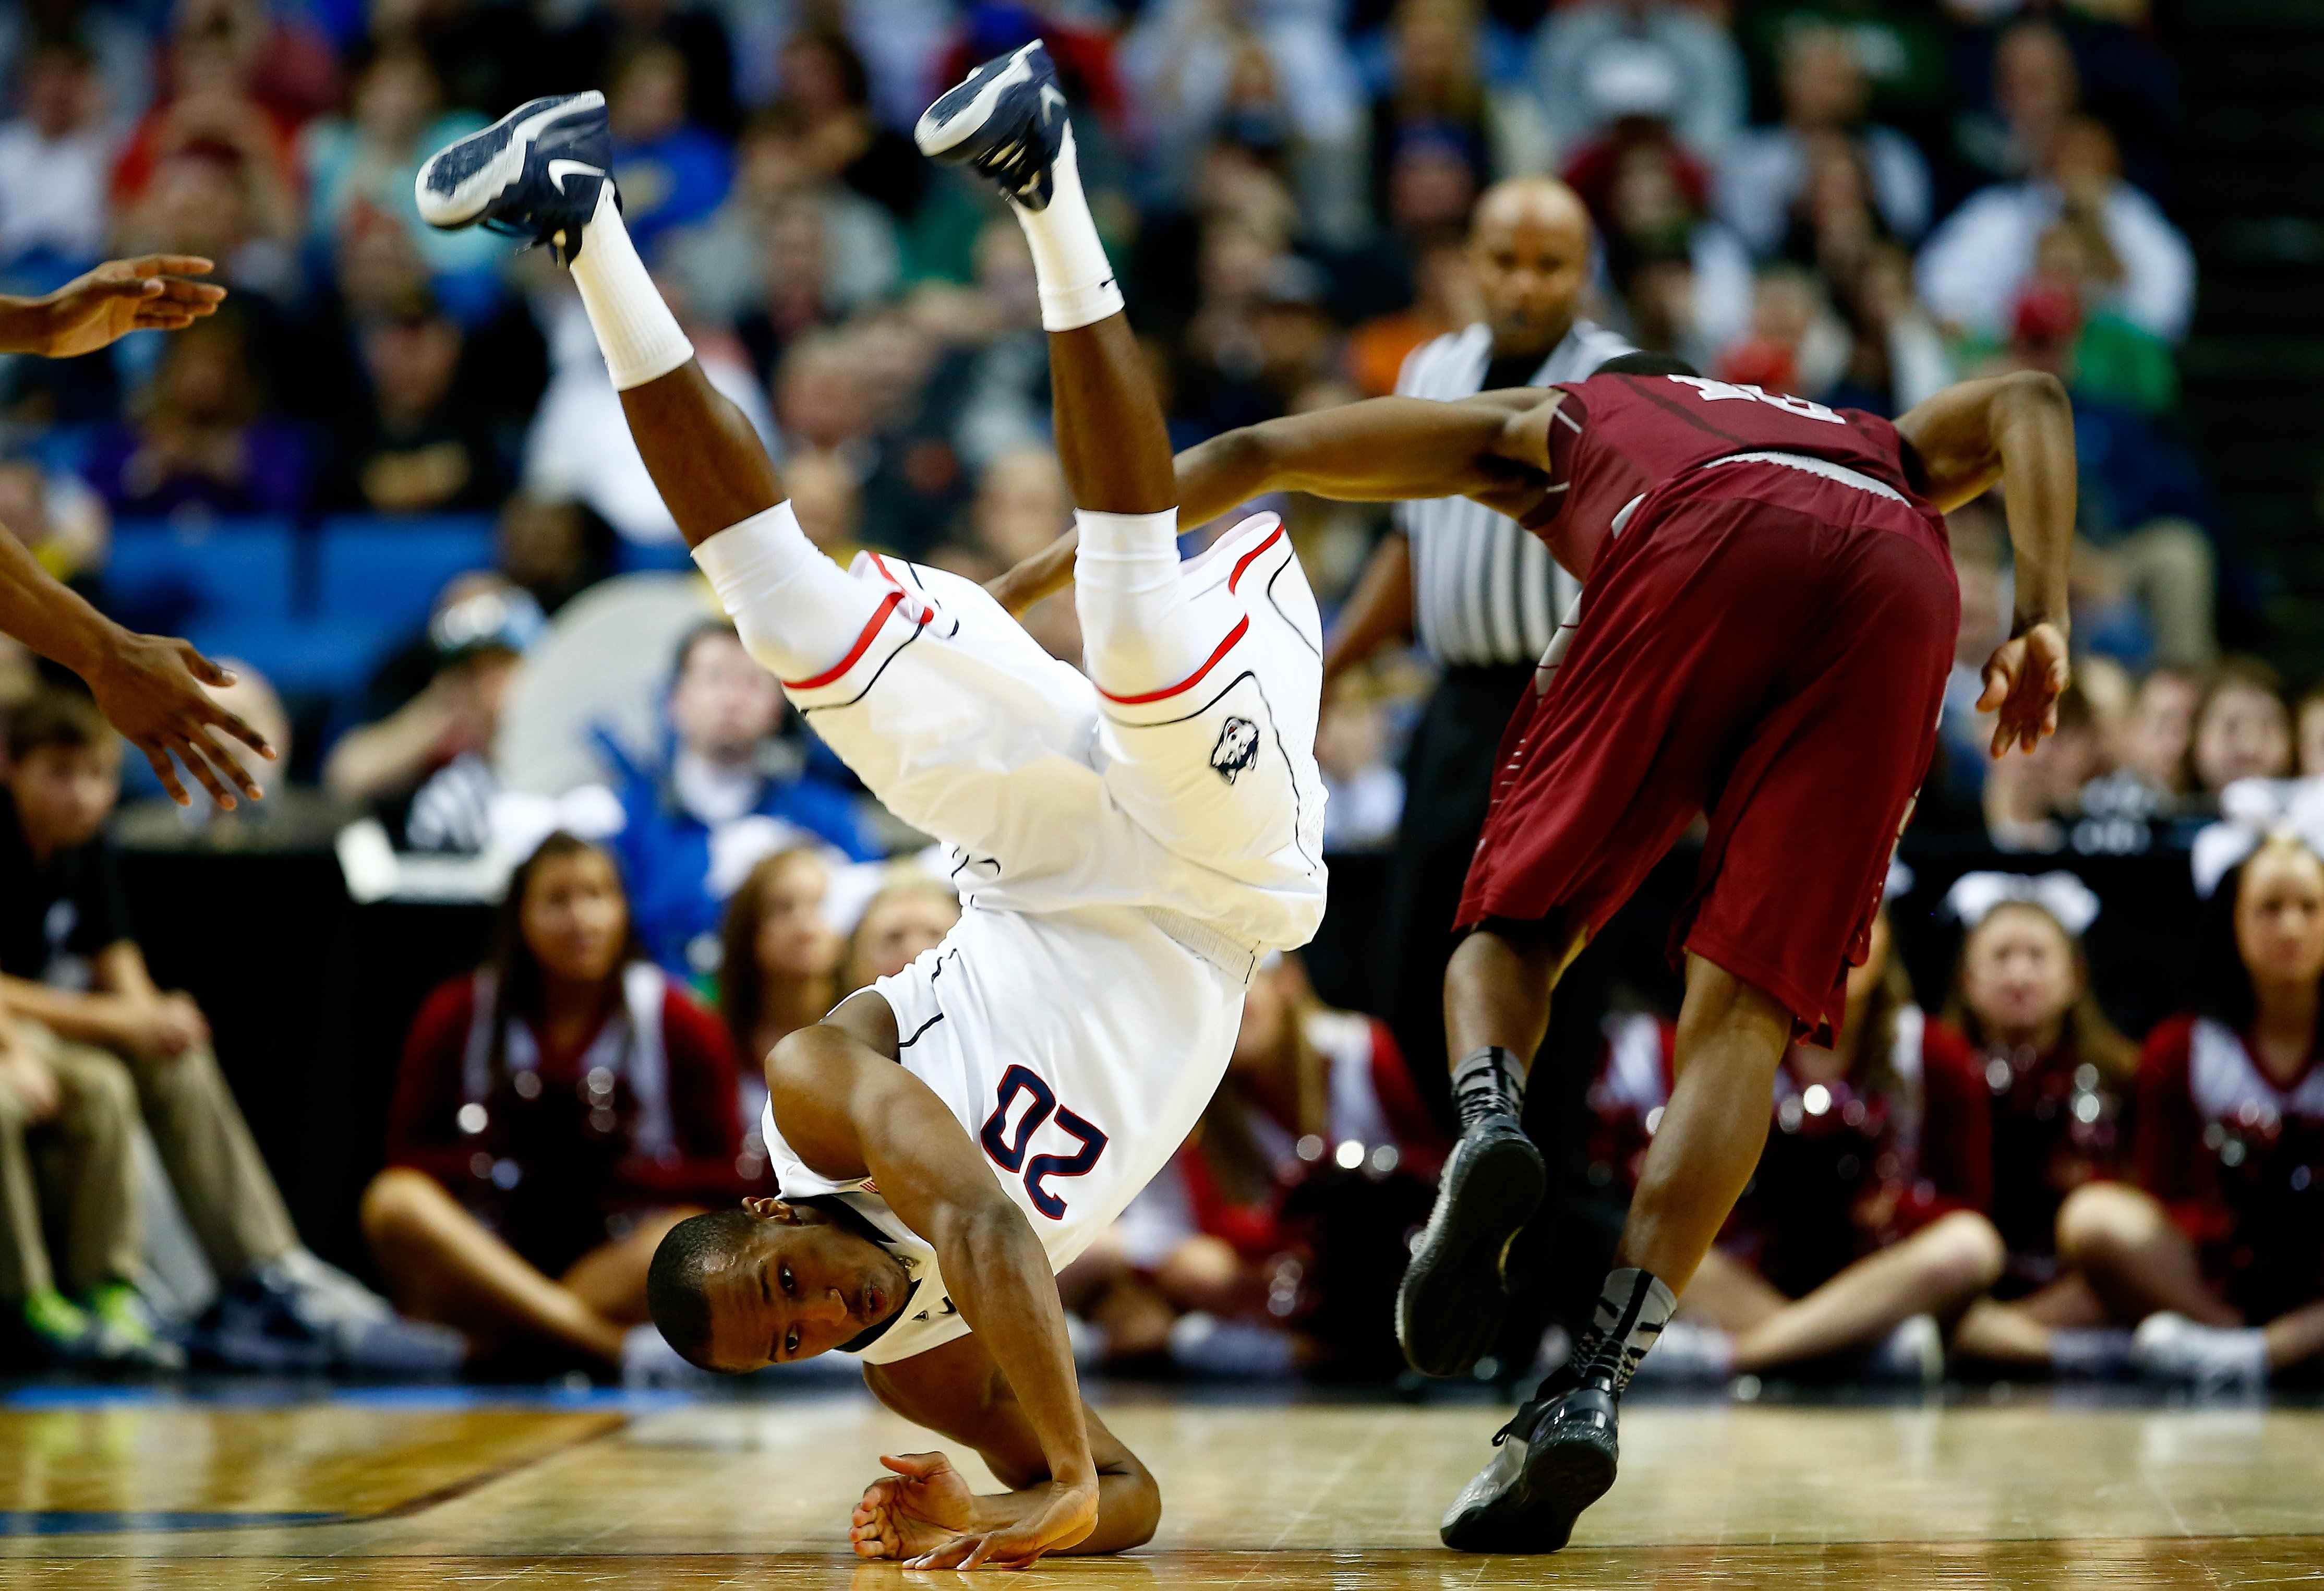 Lasan Kromah of the Connecticut Huskies and Langston Galloway of the Saint Joseph's Hawks collide during the second round of the 2014 NCAA Men's Basketball Tournament at the First Niagara Center on March 20, 2014 in Buffalo, N.Y.